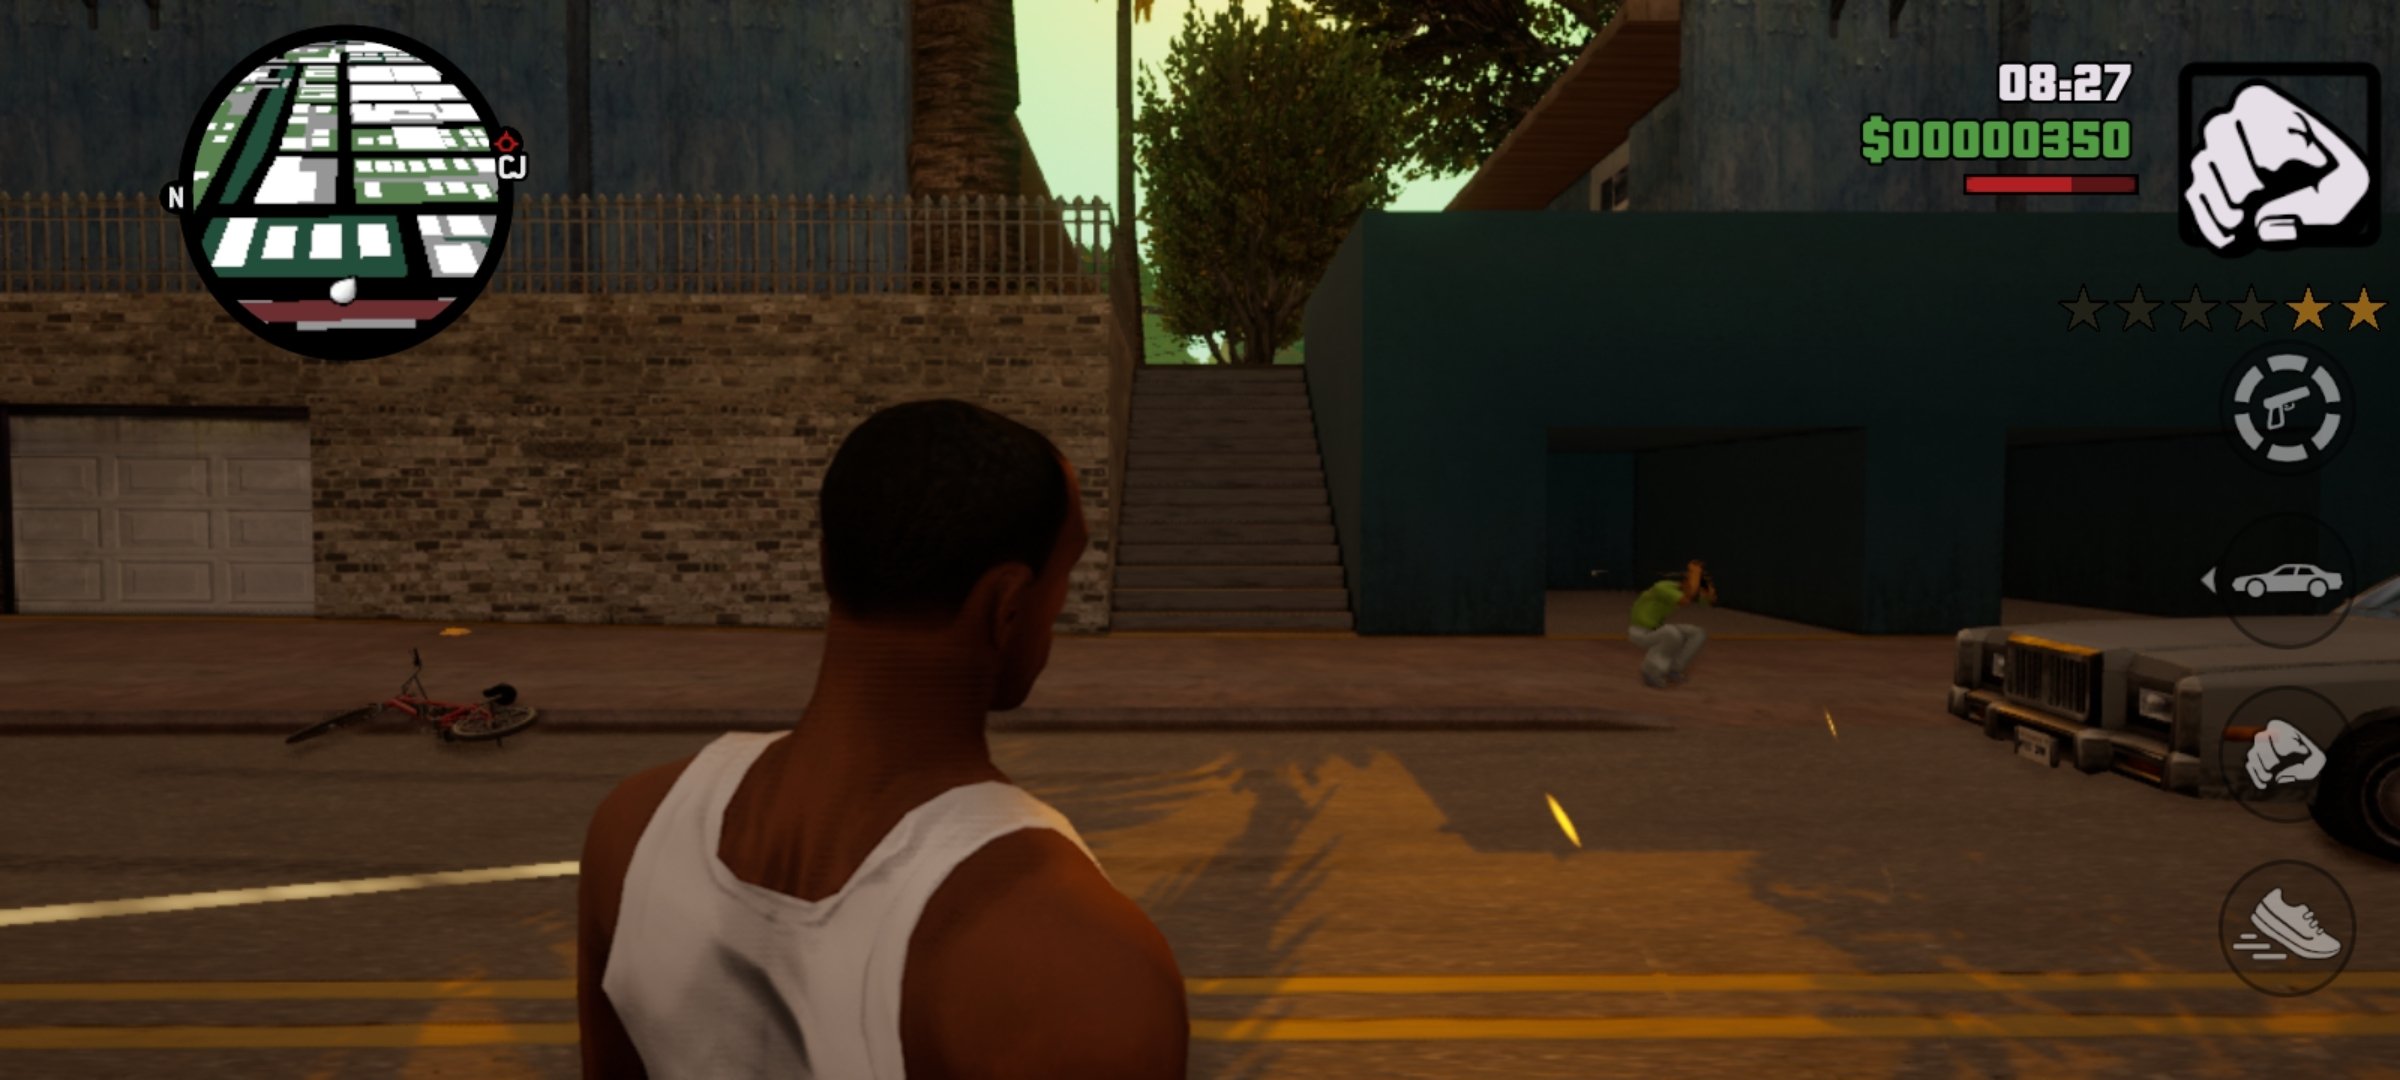 GTA San Andreas - Grand Theft Auto APK Download for Android Free